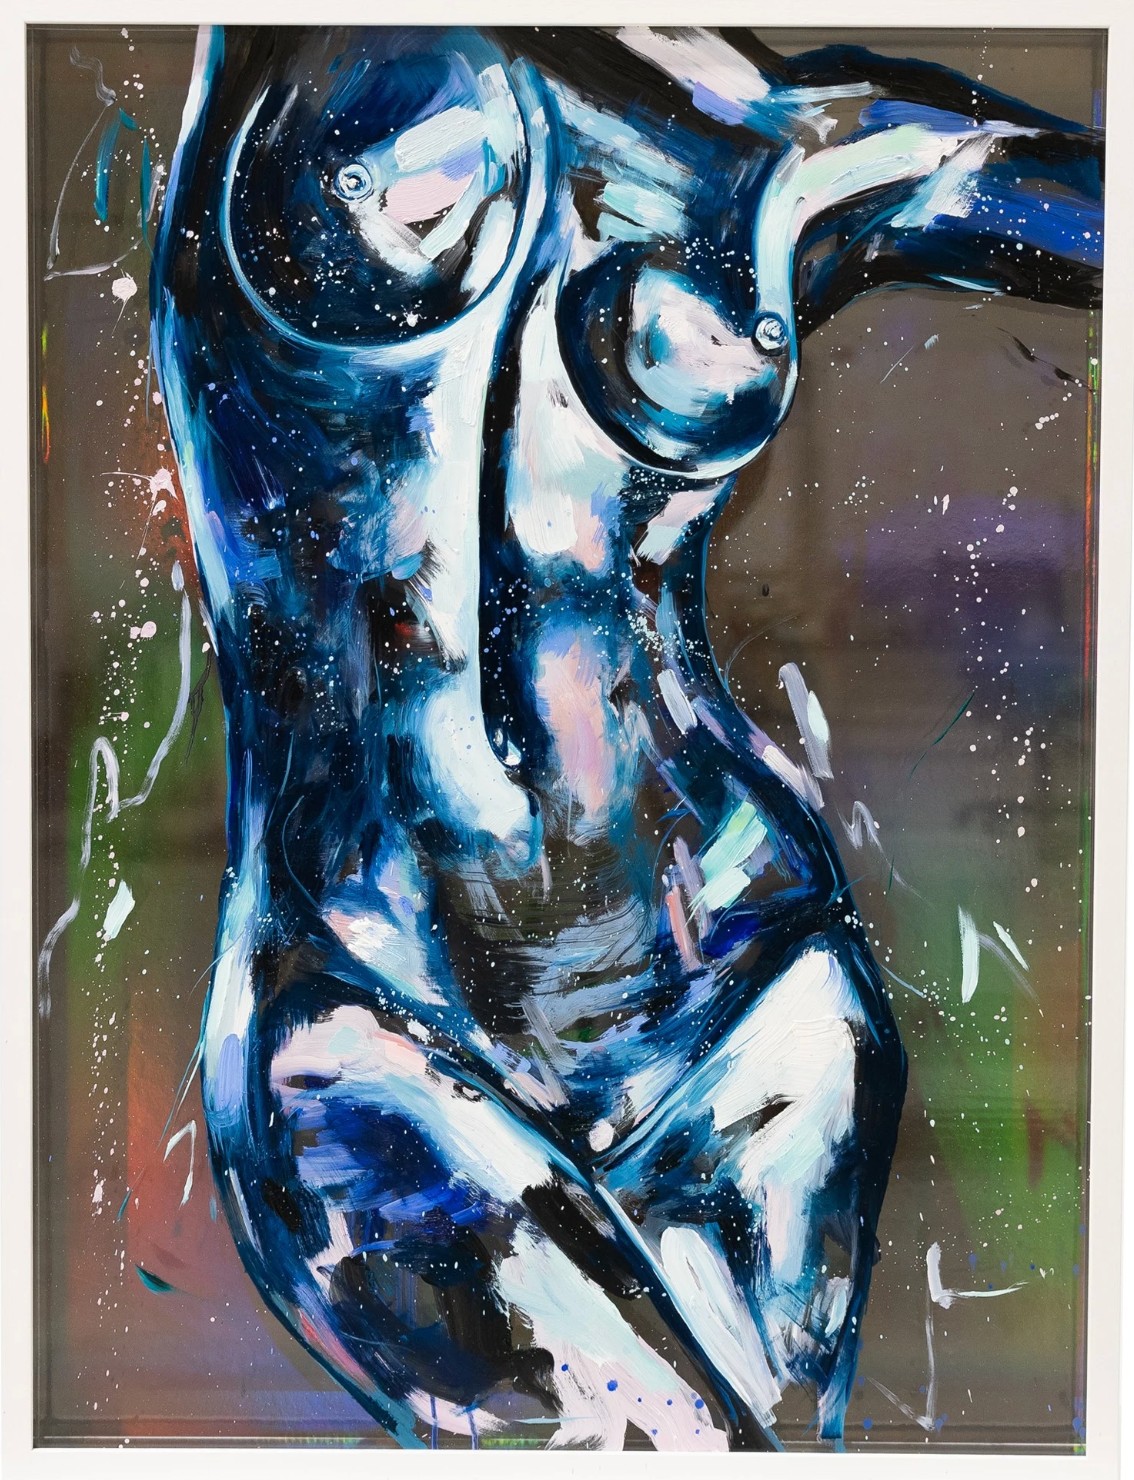 SOPHIE TEA ARTWORK 1 _ ‘Arcane’ 2023 Oil on perspex with holographic and mirror backing (79.5 x 105cm)